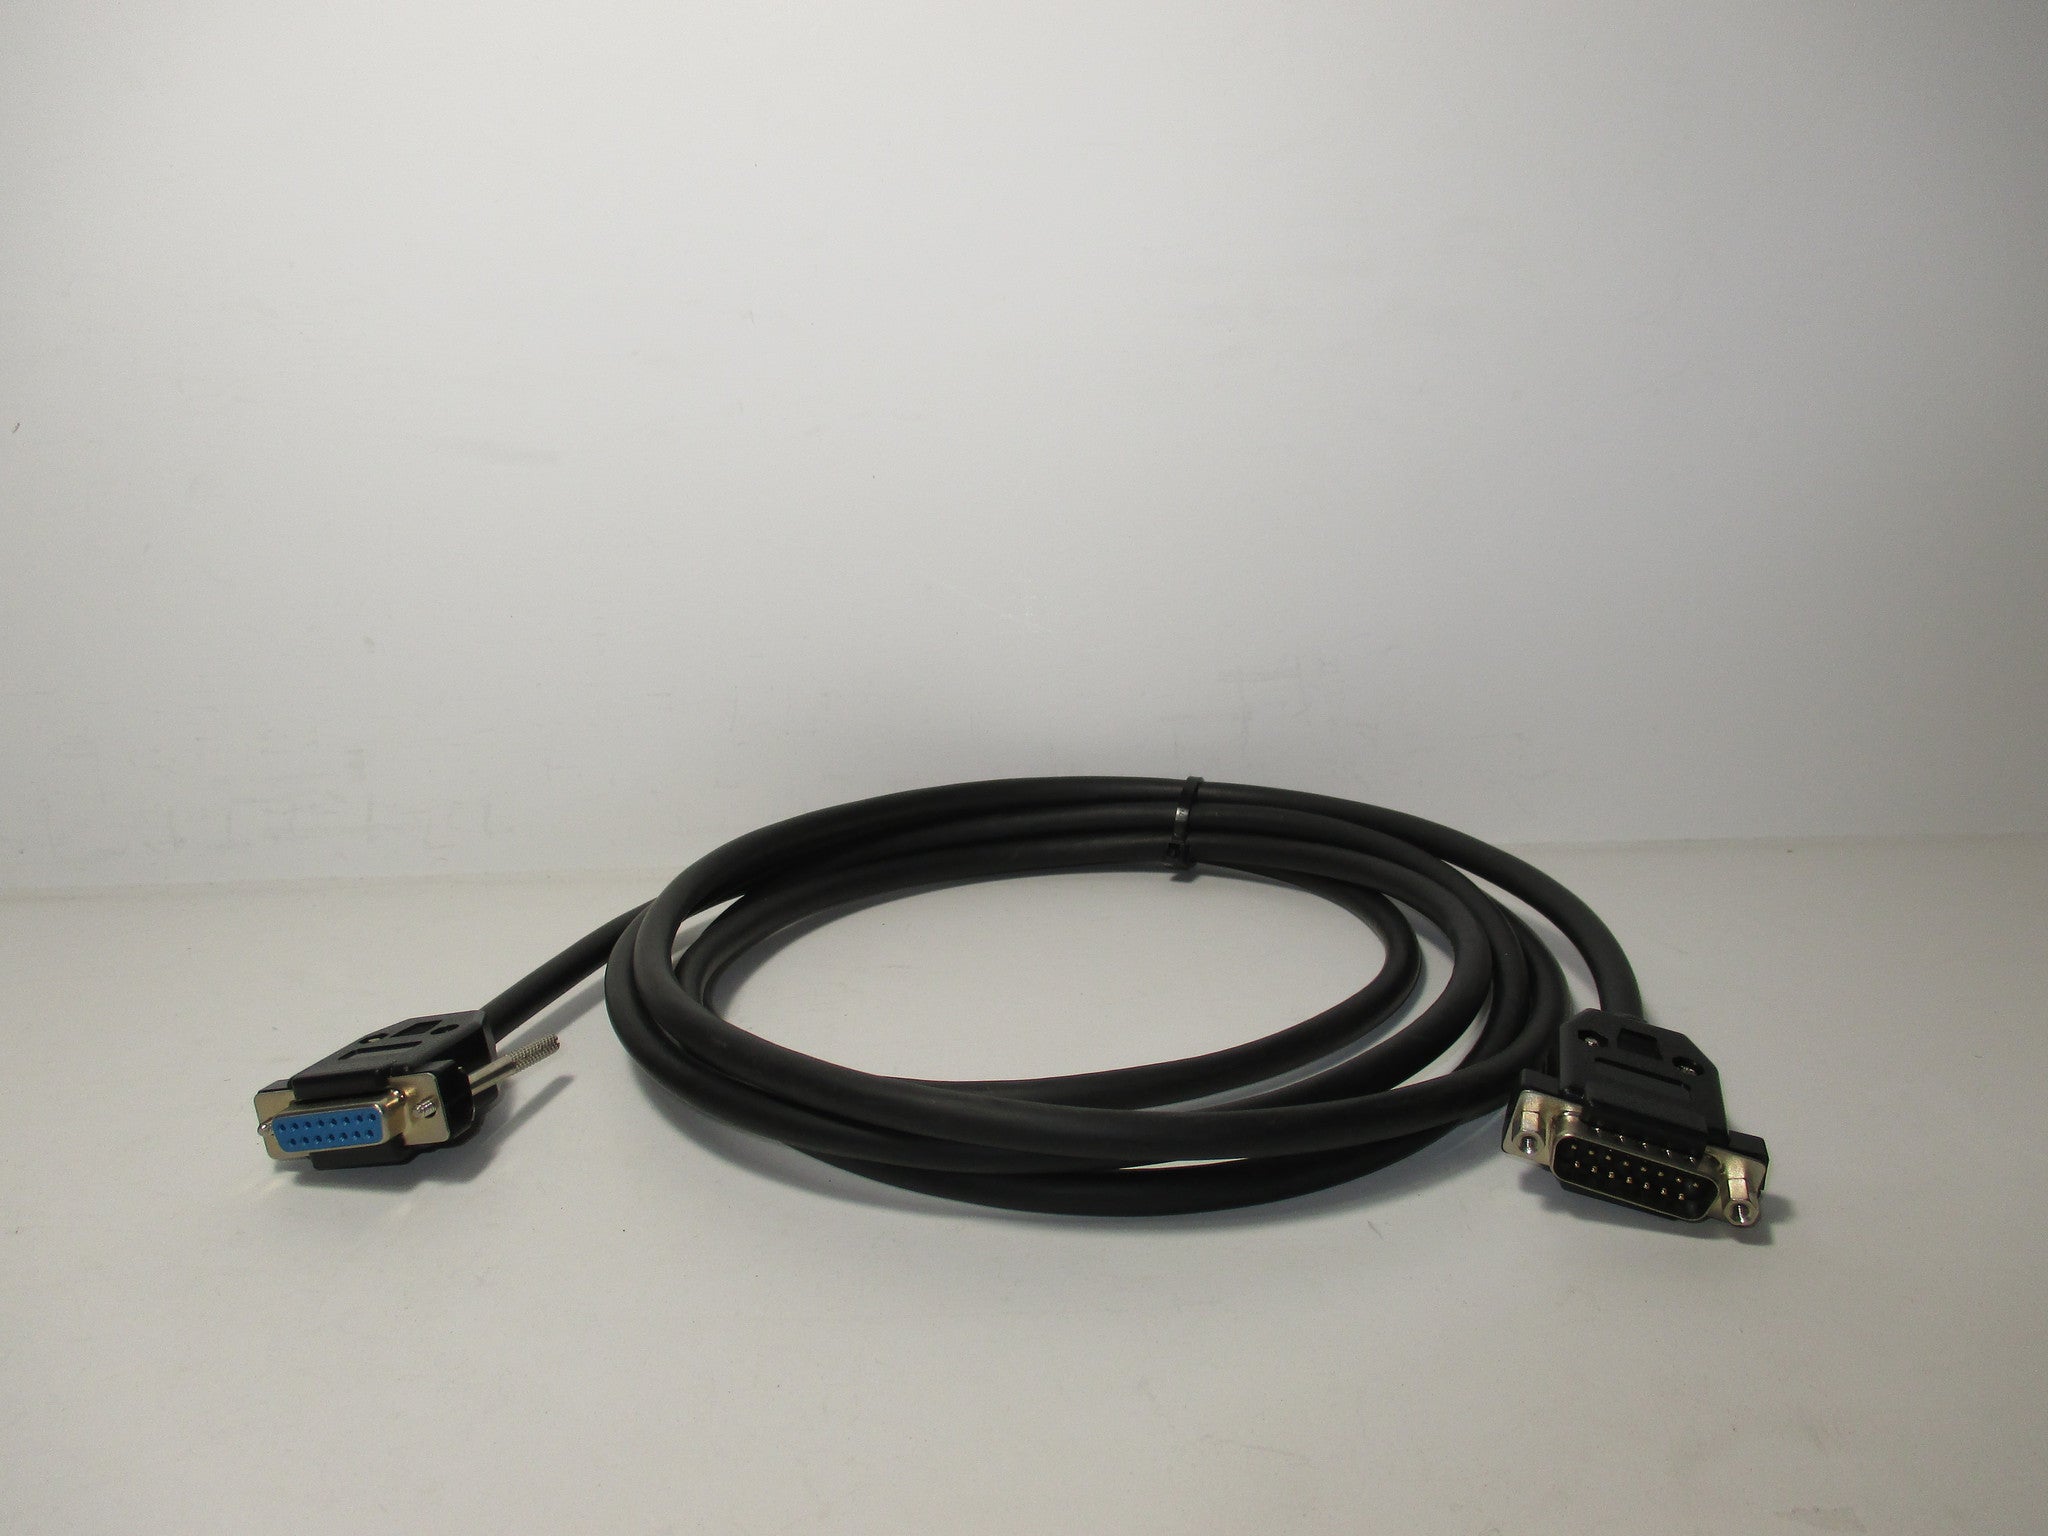 ESP OBDII AND C.A.N. CABLE EXTENSION, 9', P.N. 11031 7 25EXT9